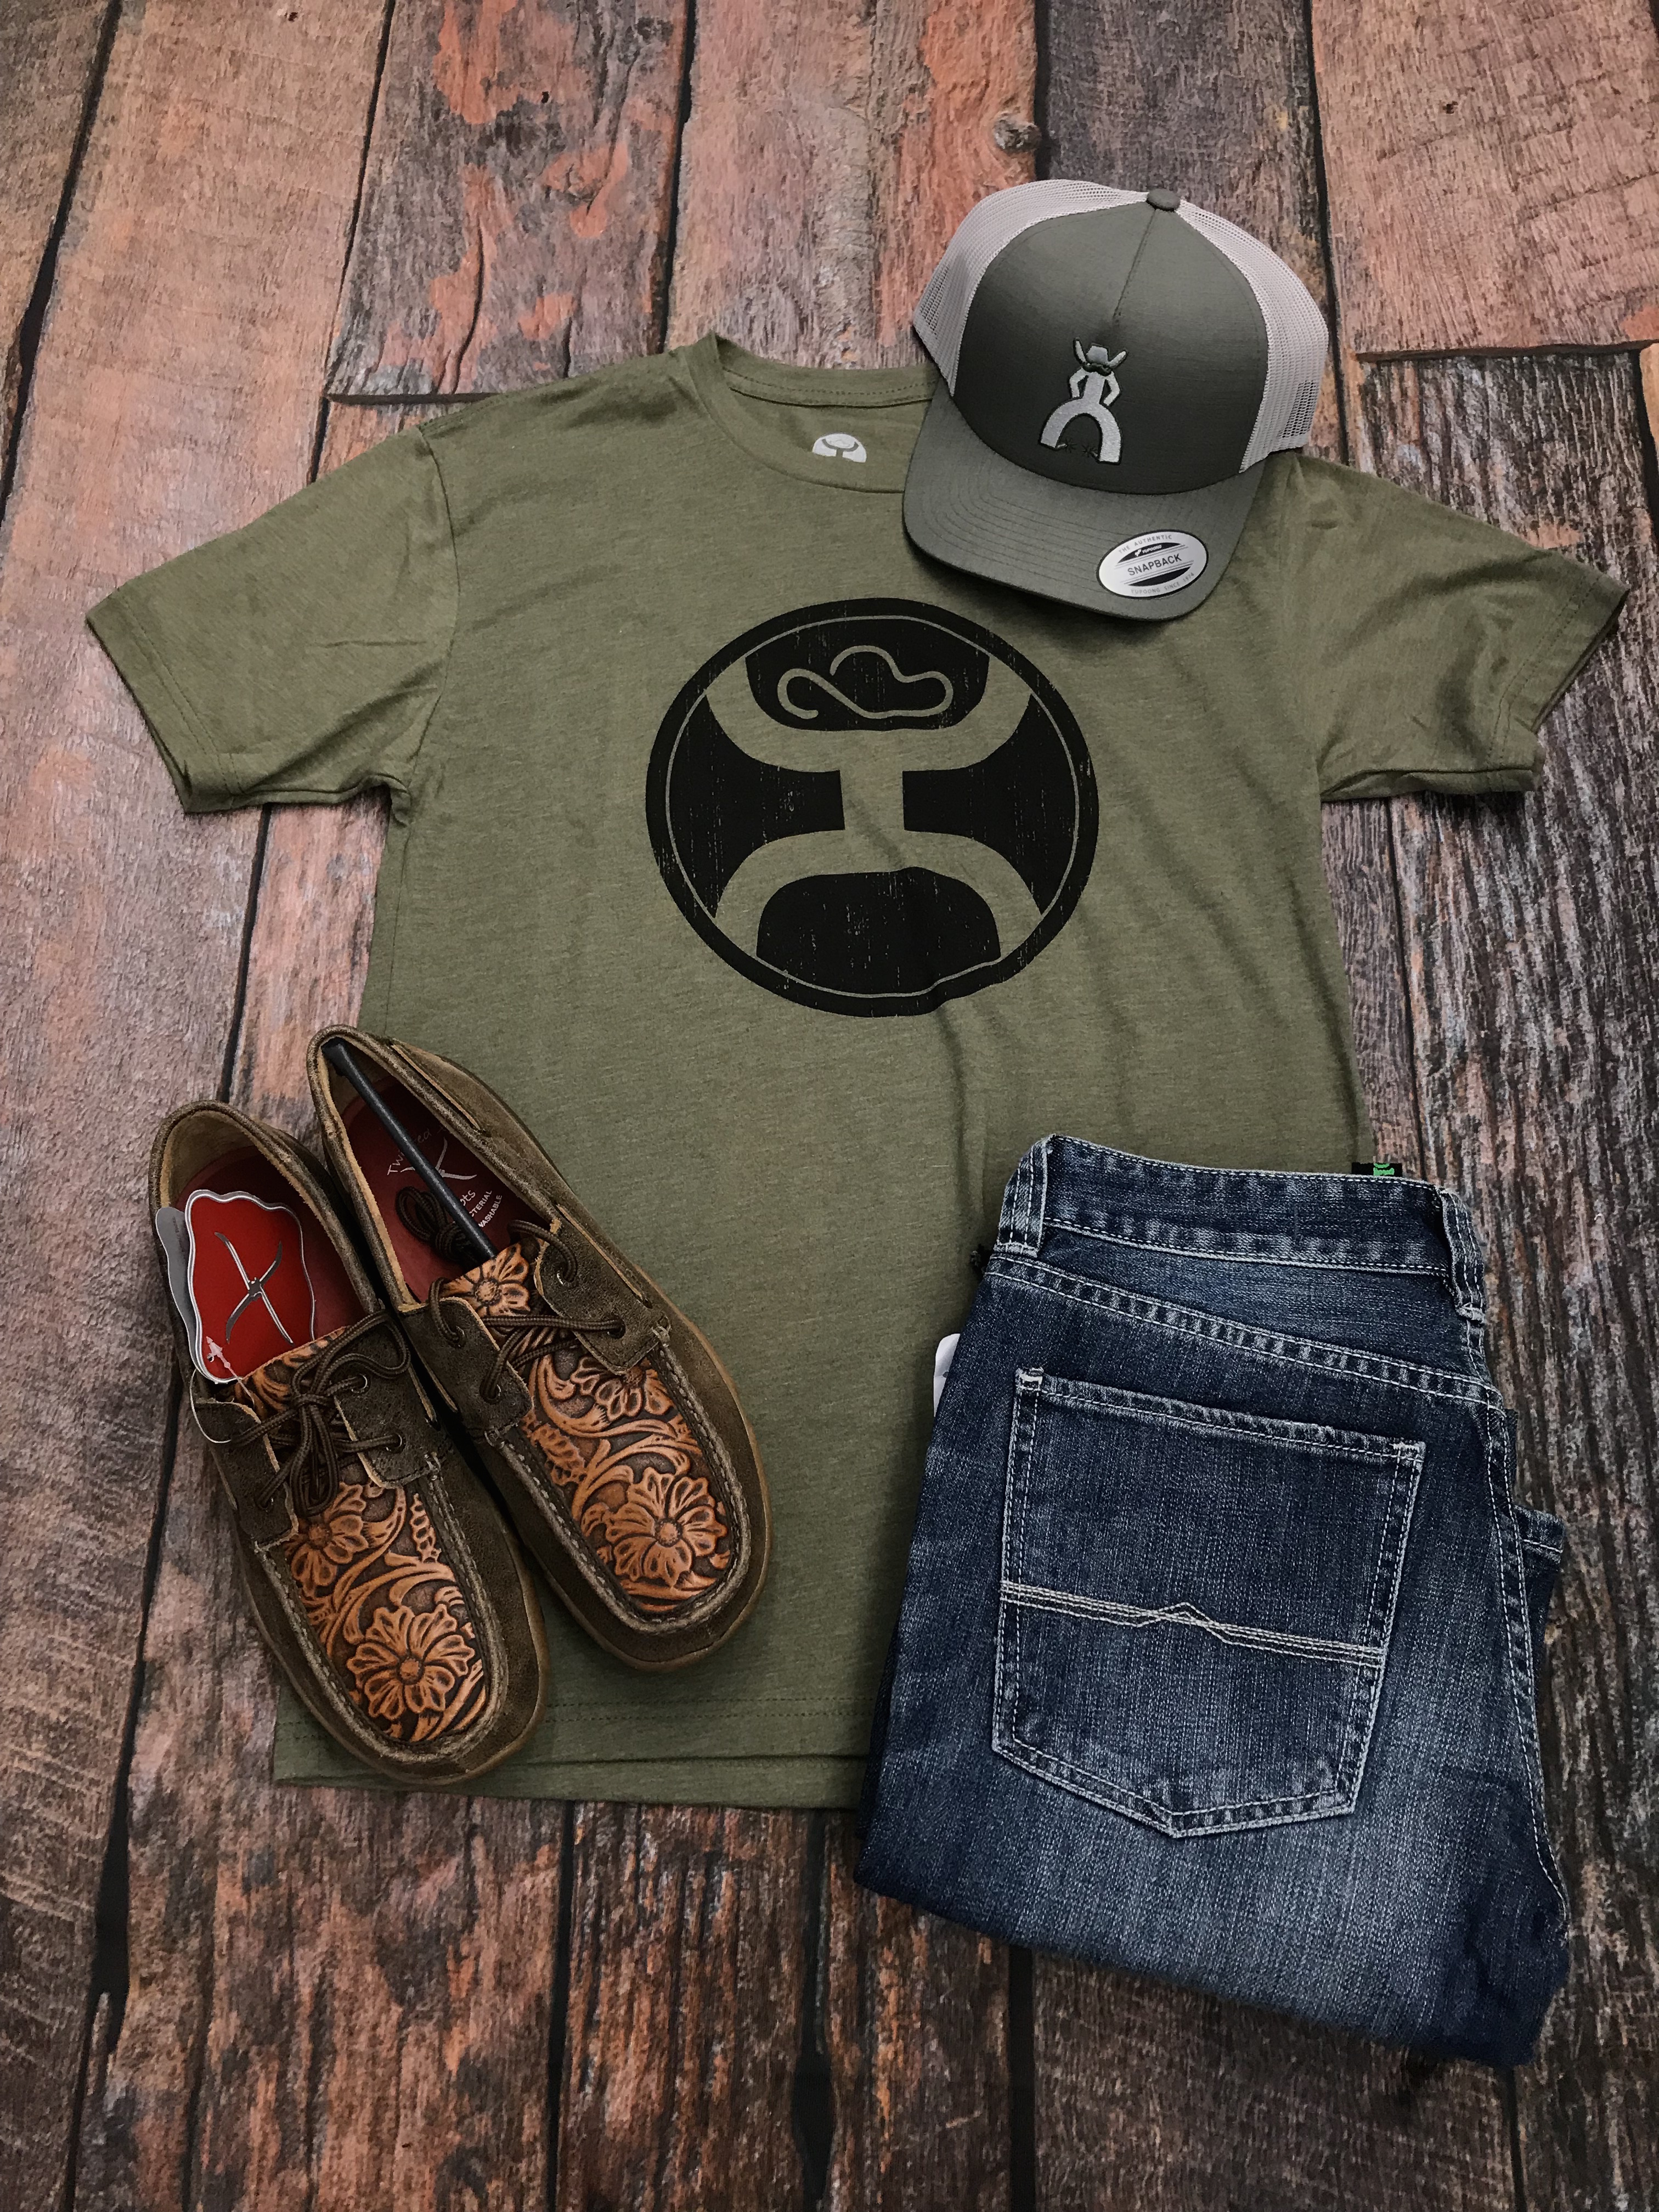 Flat Lay Of The Day - 5/19/19 - Stockyard Style